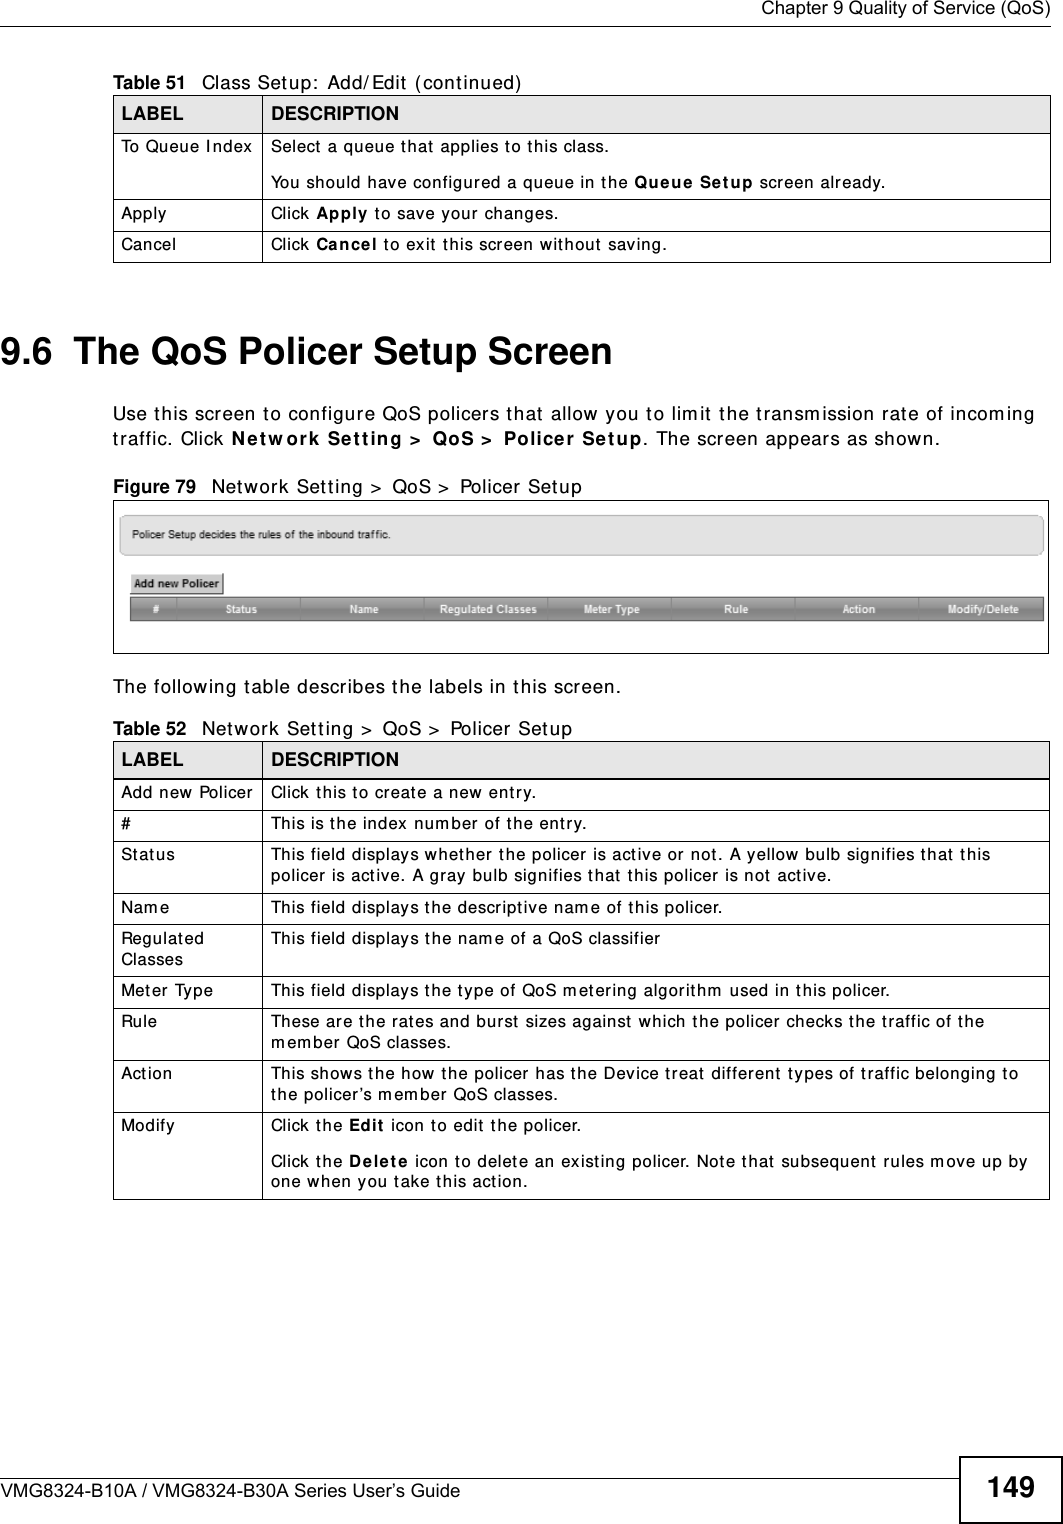  Chapter 9 Quality of Service (QoS)VMG8324-B10A / VMG8324-B30A Series User’s Guide 1499.6  The QoS Policer Setup ScreenUse t his scr een t o configure QoS policers t hat  allow you to lim it  t he t ransm ission rate of incom ing traffic. Click N et w ork Set t ing &gt;  QoS &gt;  Policer Se t up. The screen appear s as show n. Figure 79   Net work Set t ing &gt;  QoS &gt;  Policer Set up The following t able describes t he labels in this screen.  To Queue I ndex Select a queue t hat applies to t his class.You should have configured a queue in t he Que ue  Se t up screen already.Apply Click Apply t o save your  changes.Cancel Click Ca ncel t o exit  t his screen wit hout  saving.Table 51   Class Set up:  Add/ Edit  ( cont inued)LABEL DESCRIPTIONTable 52   Net work Set ting &gt;  QoS &gt;  Policer Set upLABEL DESCRIPTIONAdd new Policer Click  this t o create a new entry.#This is t he index num ber of t he entry.St atus This field display s whether t he policer is act ive or not . A yellow  bulb signifies t hat  t his policer is active. A gray bulb signifies that this policer is not  active.Nam e This field displays t he descript ive nam e of t his policer.Regulat ed ClassesThis field display s t he nam e of a QoS classifierMet er Type This field displays t he t ype of QoS m etering algorit hm  used in t his policer.Rule These are t he rat es and burst  sizes against  which t he policer checks t he t raffic of t he m em ber QoS classes.Act ion This shows t he how  t he policer  has t he Device treat differ ent  types of traffic belonging t o the policer’s m em ber QoS classes.Modify Click t he Ed it  icon to edit  t he policer.Click the D ele t e icon to delet e an exist ing policer. Not e t hat  subsequent rules m ove up by one when you t ake this action.